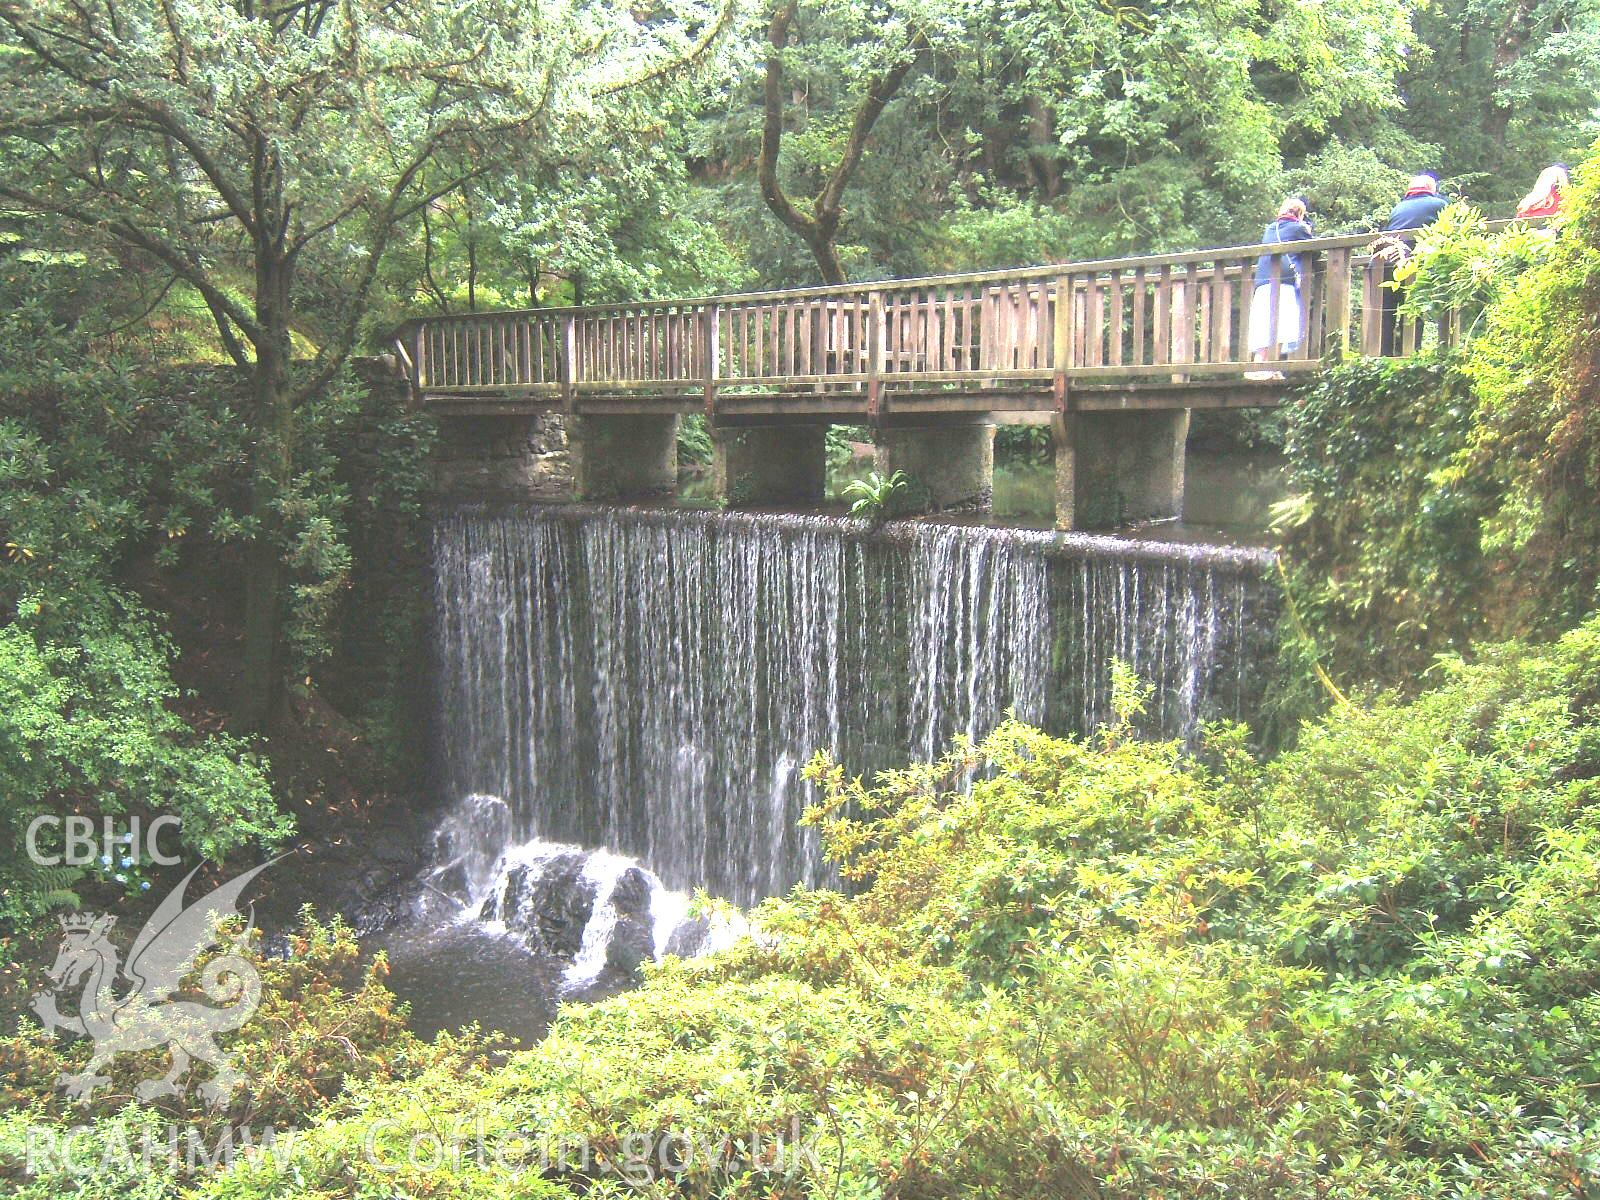 'The Waterfall' or Mill Pond Dam/Weir and bridge from the north-west.